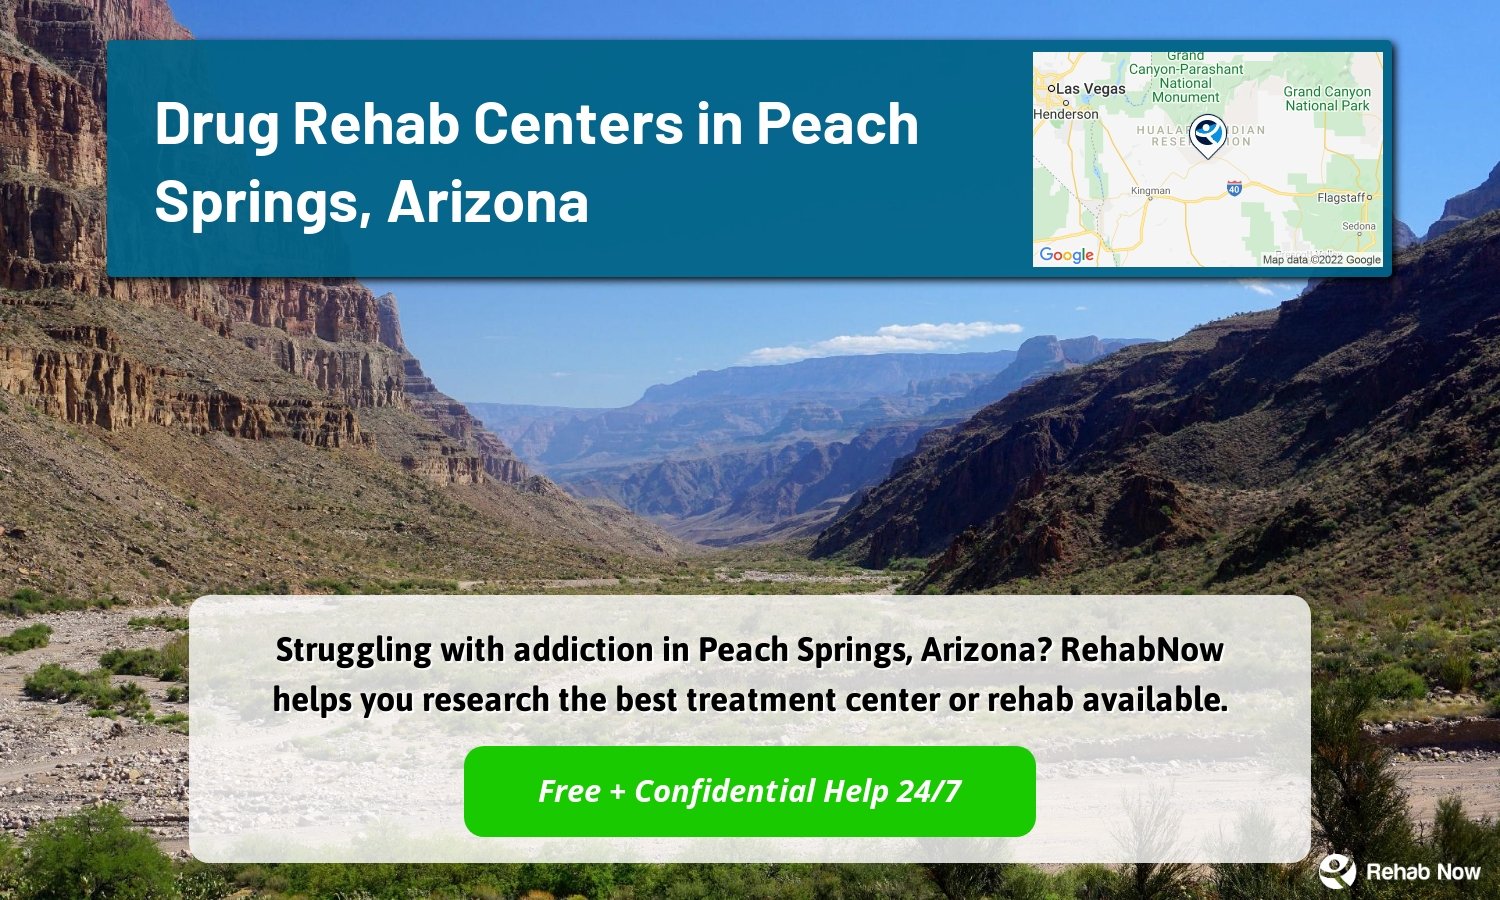 Struggling with addiction in Peach Springs, Arizona? RehabNow helps you research the best treatment center or rehab available.